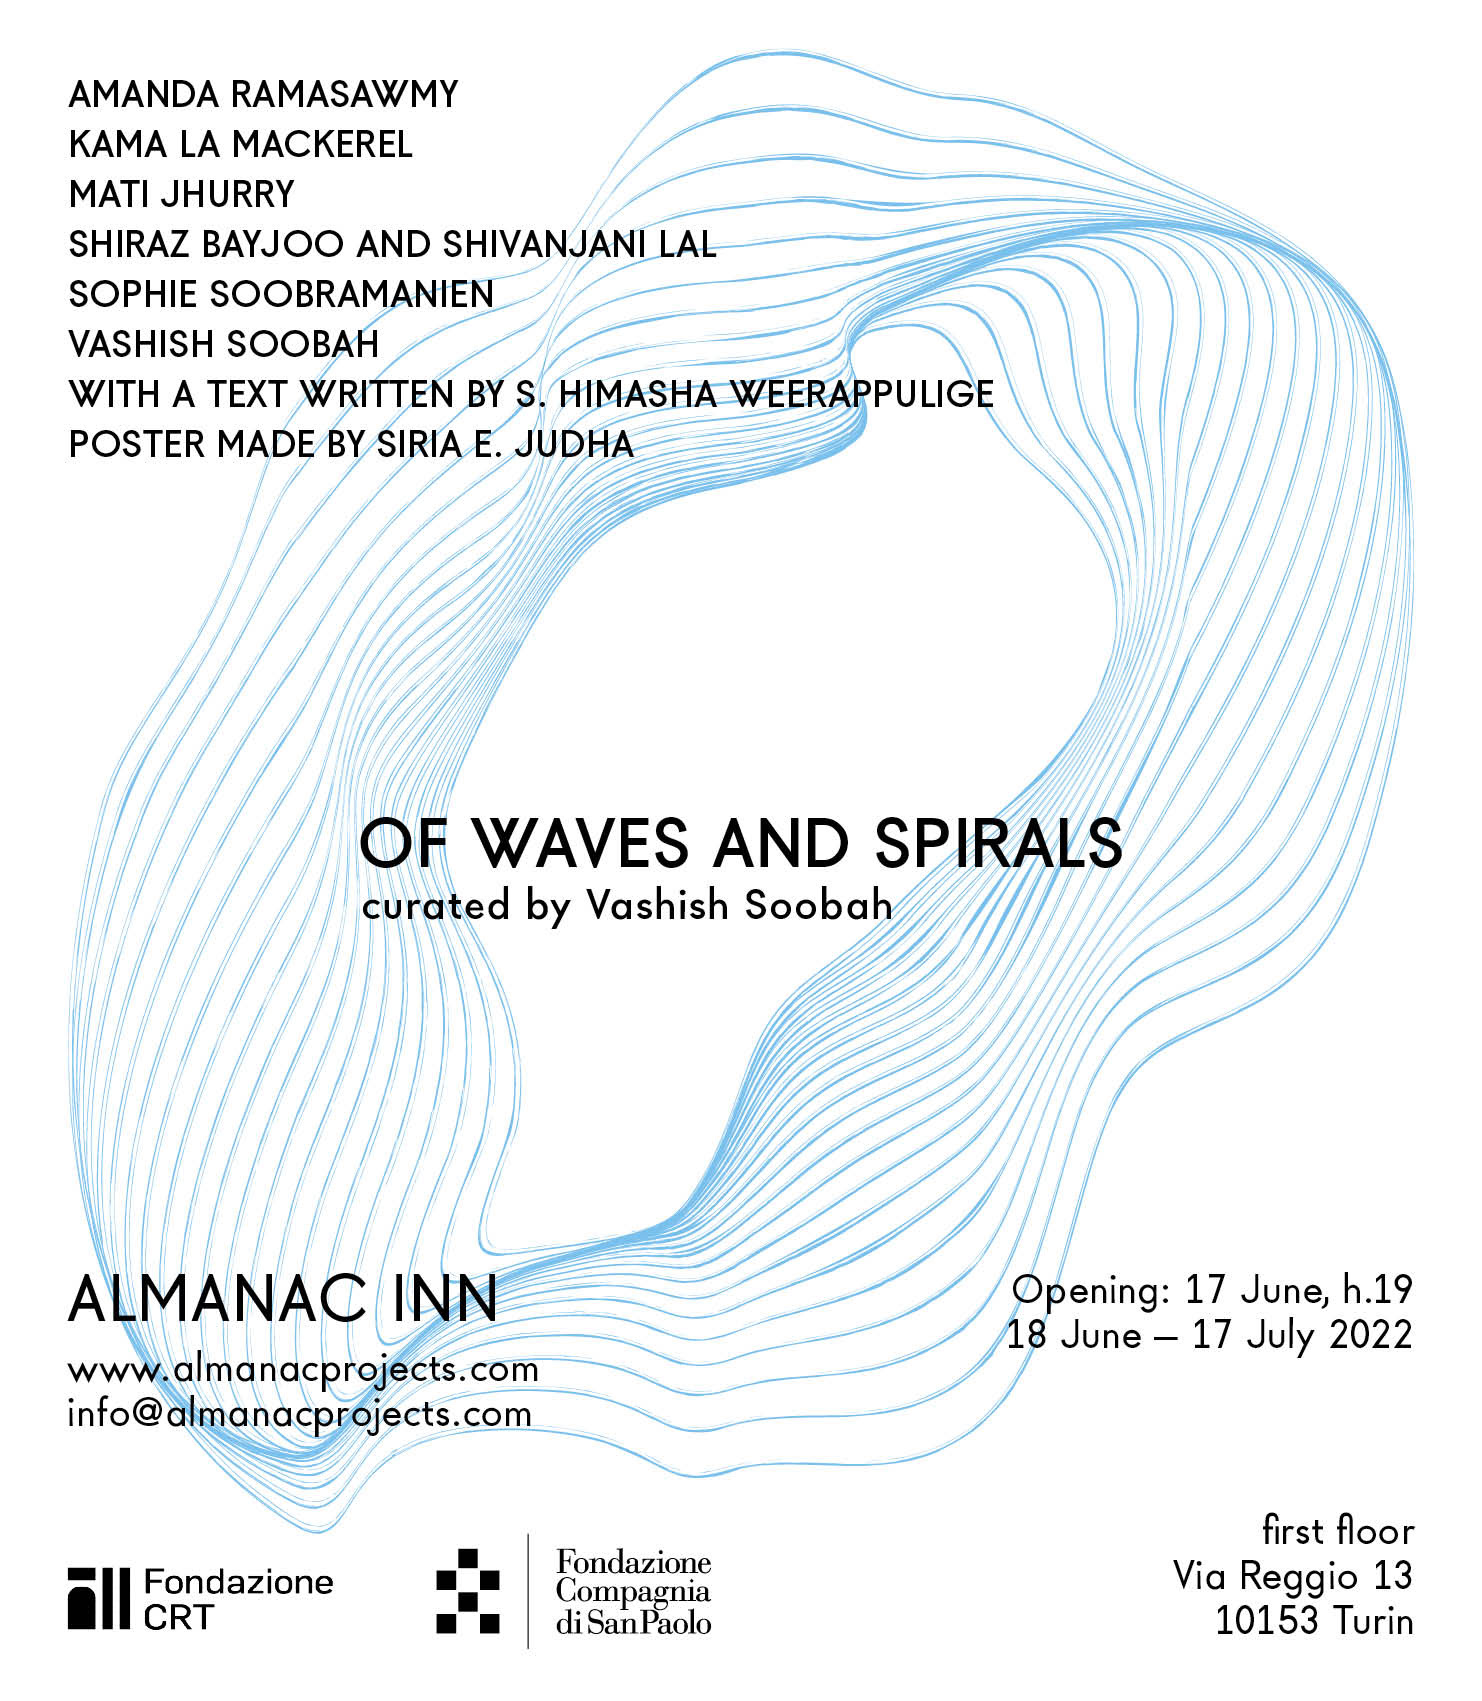 Of waves and spirals